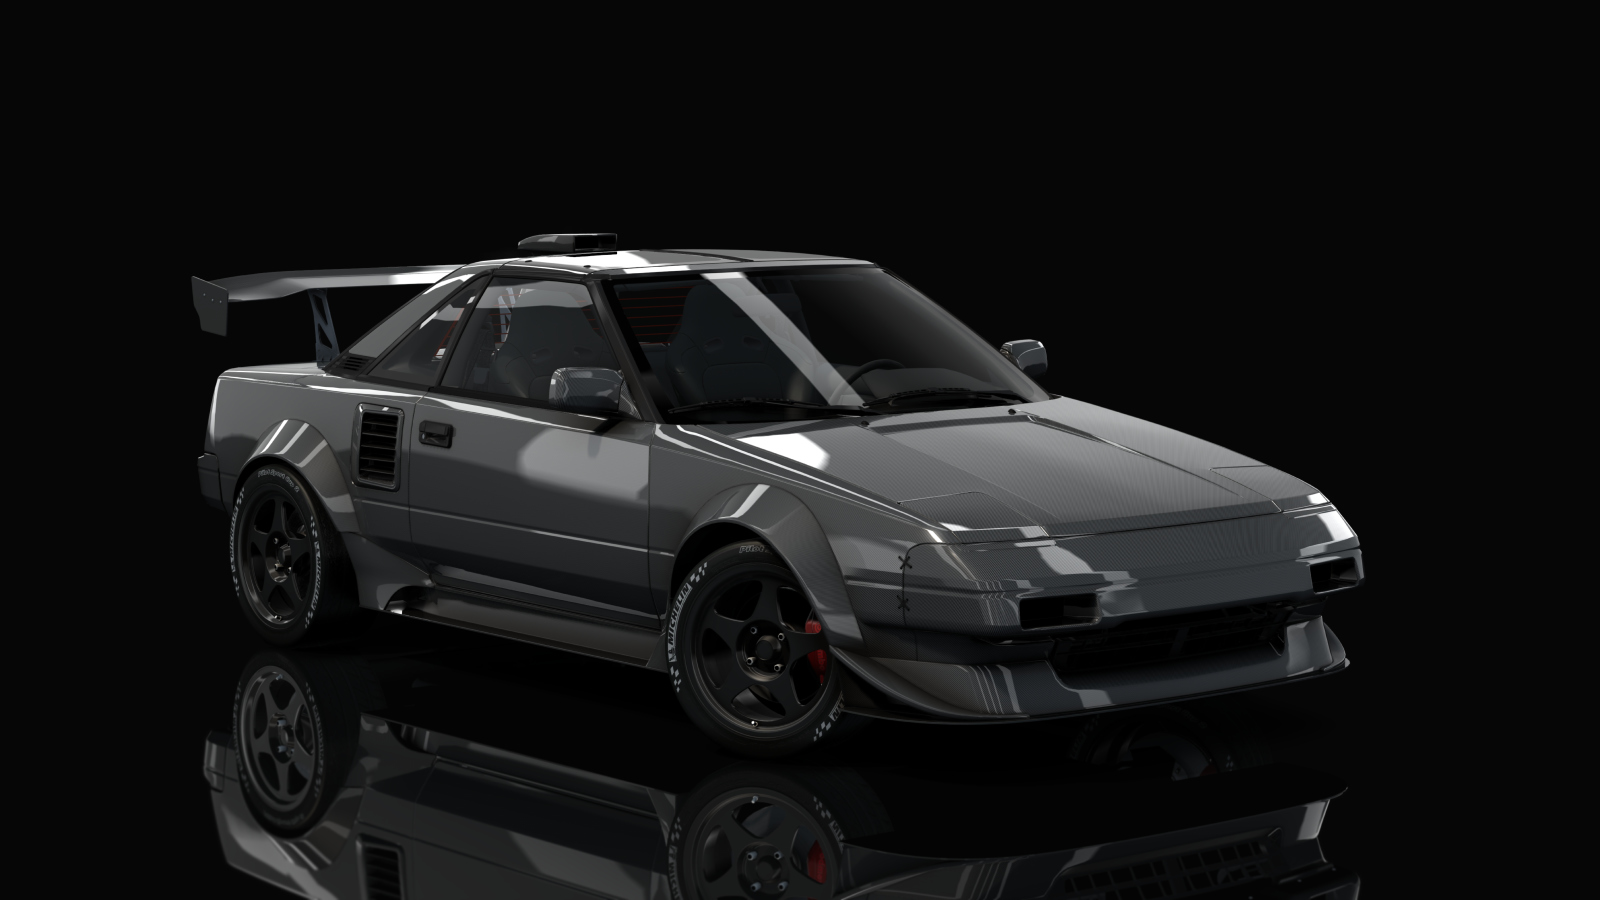 Toyota MR2 SC AW11 Time Attack, skin _Carbon